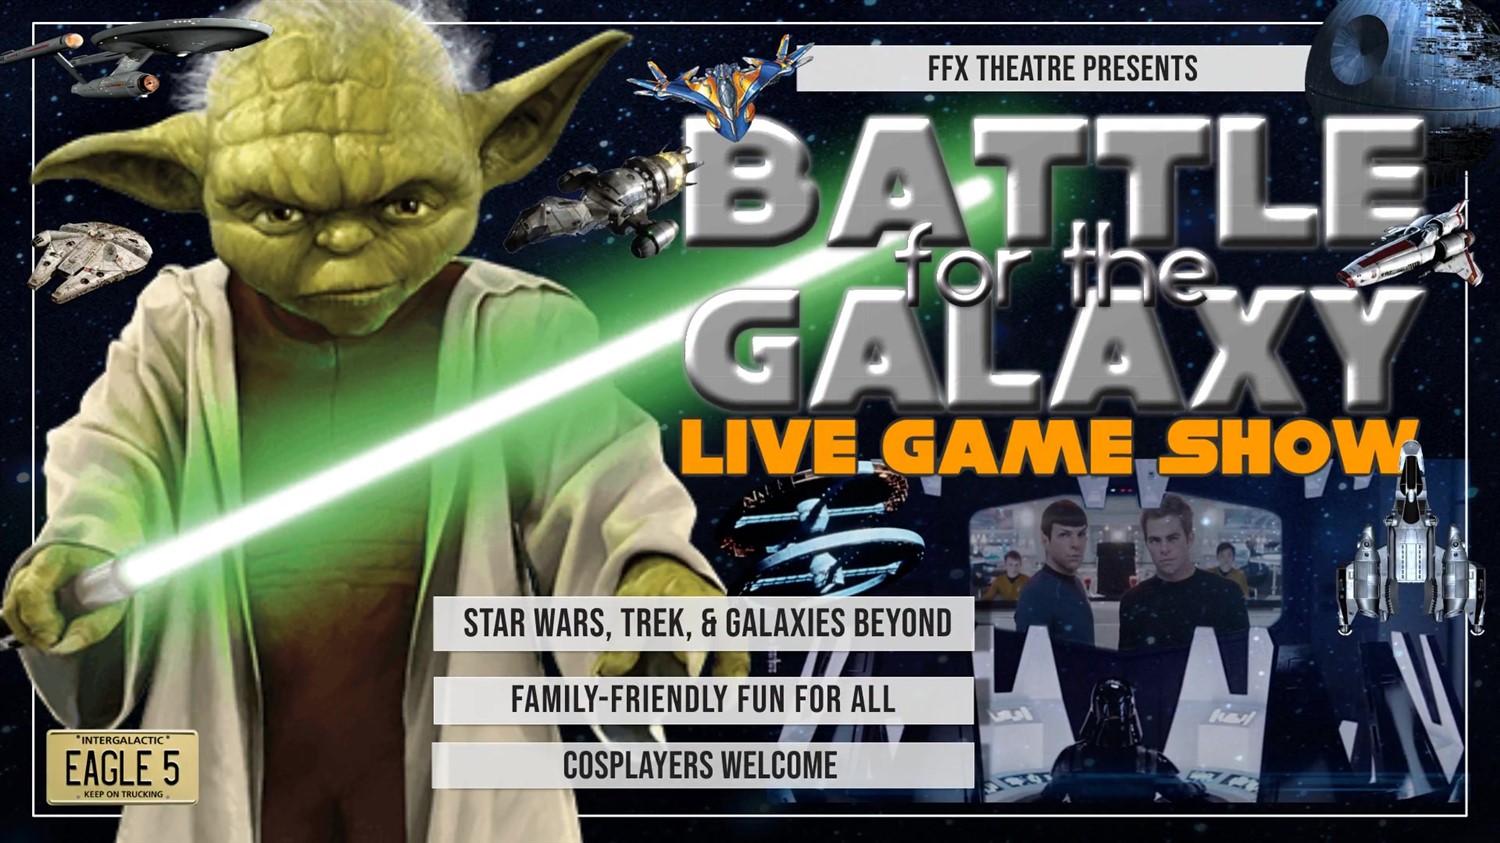 BATTLE FOR THE GALAXY Live Sci-Fi Game Show with Costume Cosplay Contest! on oct. 19, 19:00@FFX Theatre - Pick a seat, Buy tickets and Get information on Family Fun Xperience tickets.ffxshow.org